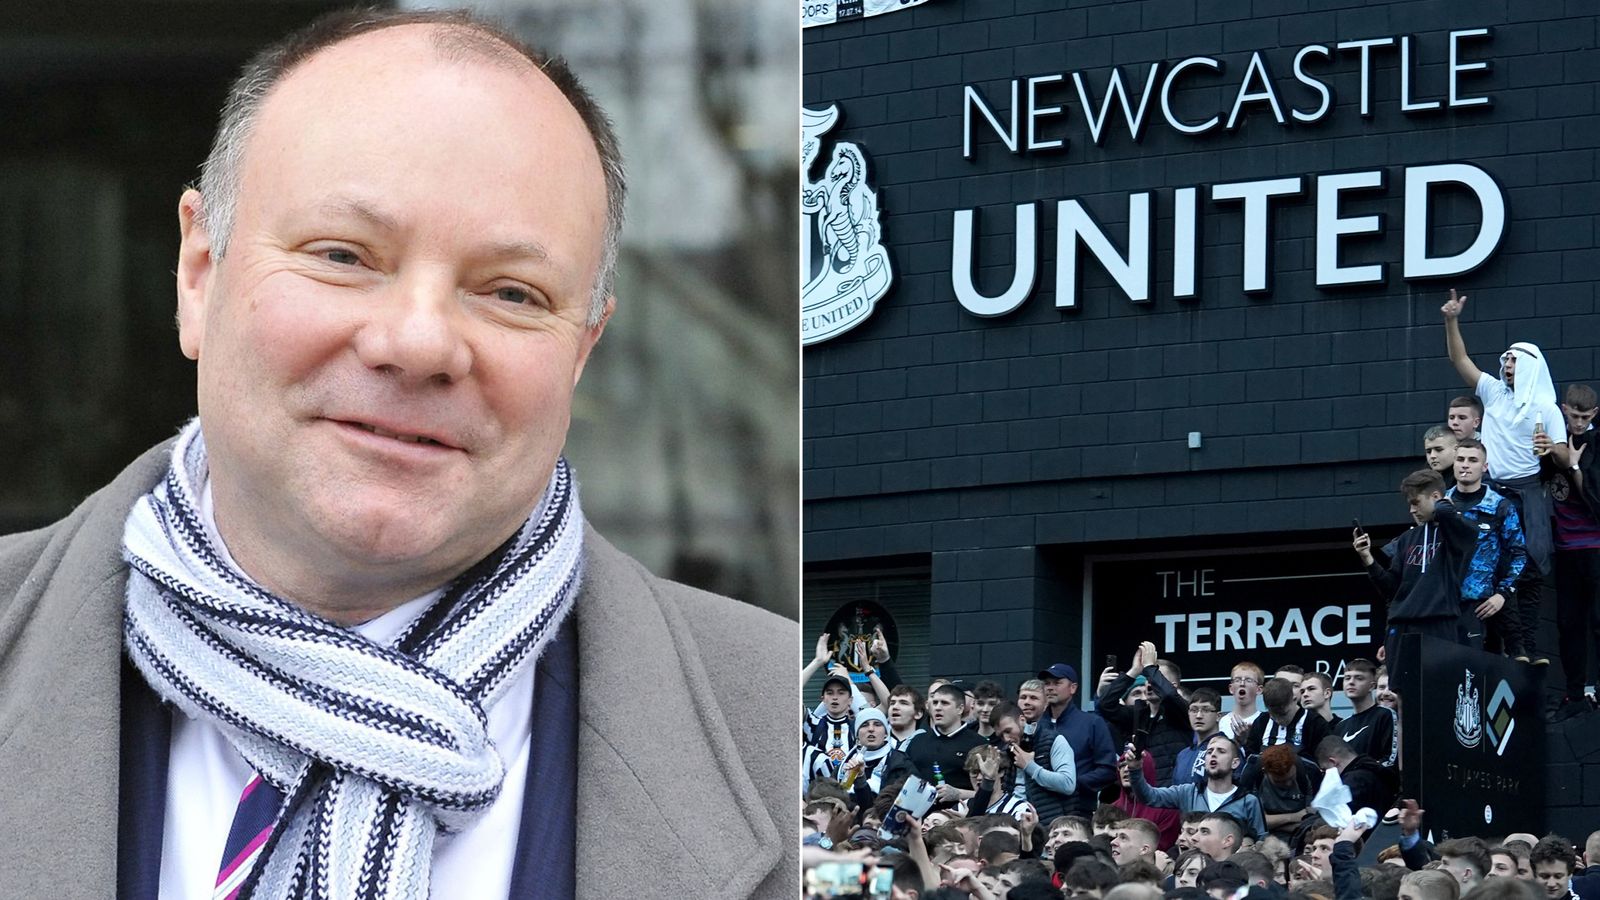 Premier League chairman Hoffman to resign amid clubs' fury over Newcastle deal